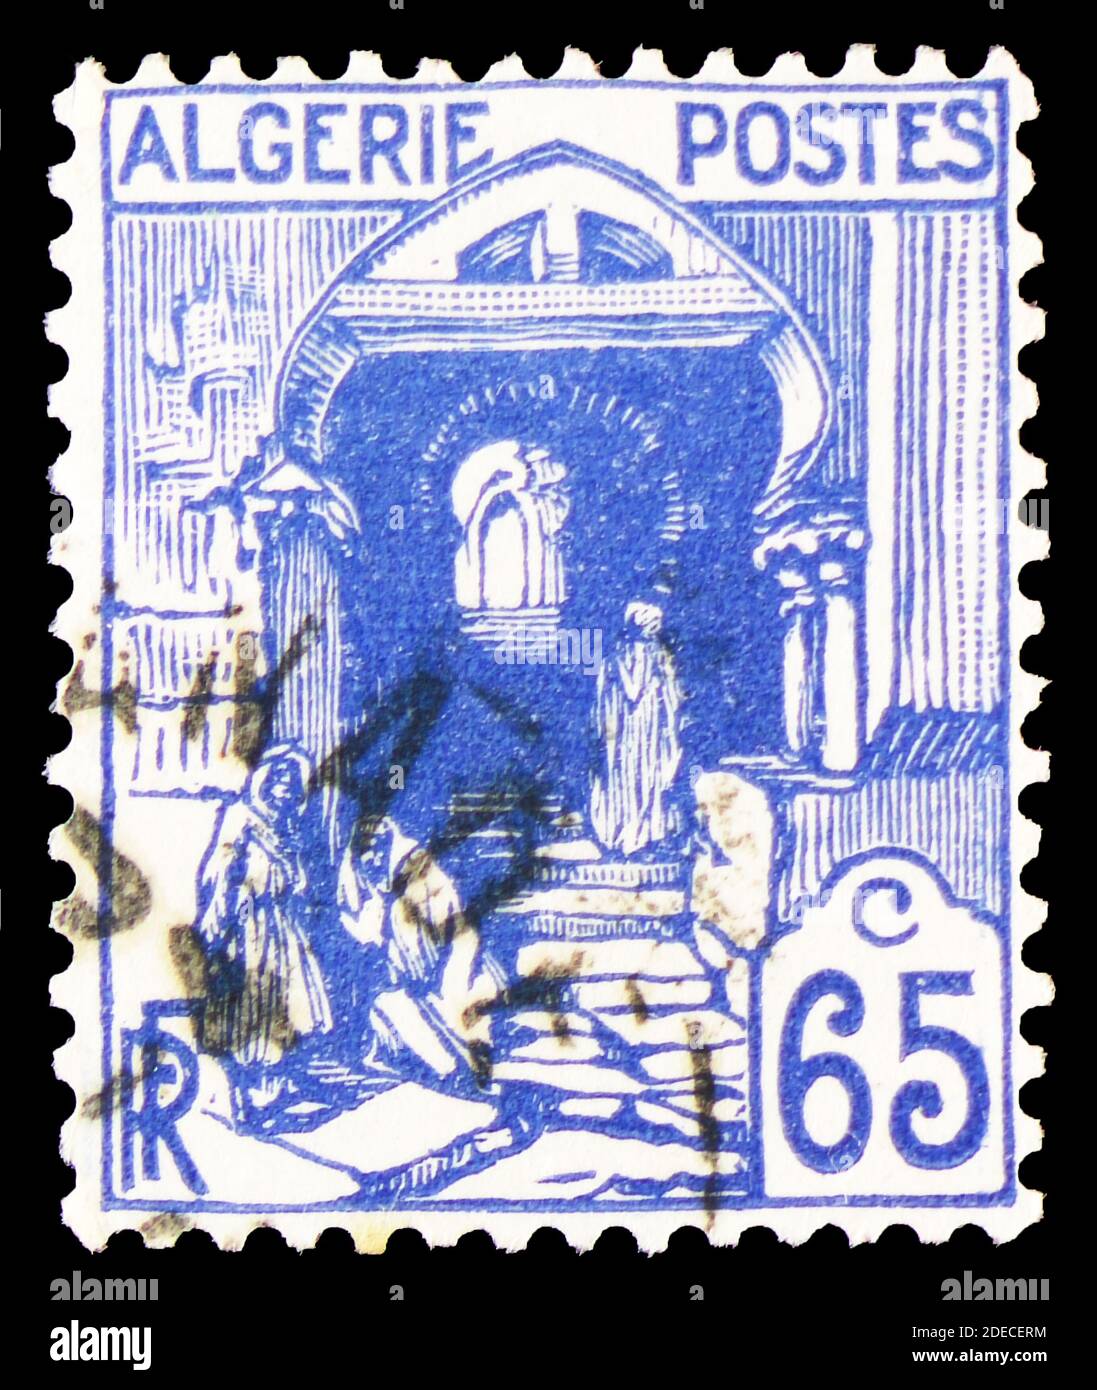 MOSCOW, RUSSIA - OCTOBER 17, 2020: Postage stamp printed in Algeria shows Kasbah Street, Algiers serie, circa 1938 Stock Photo